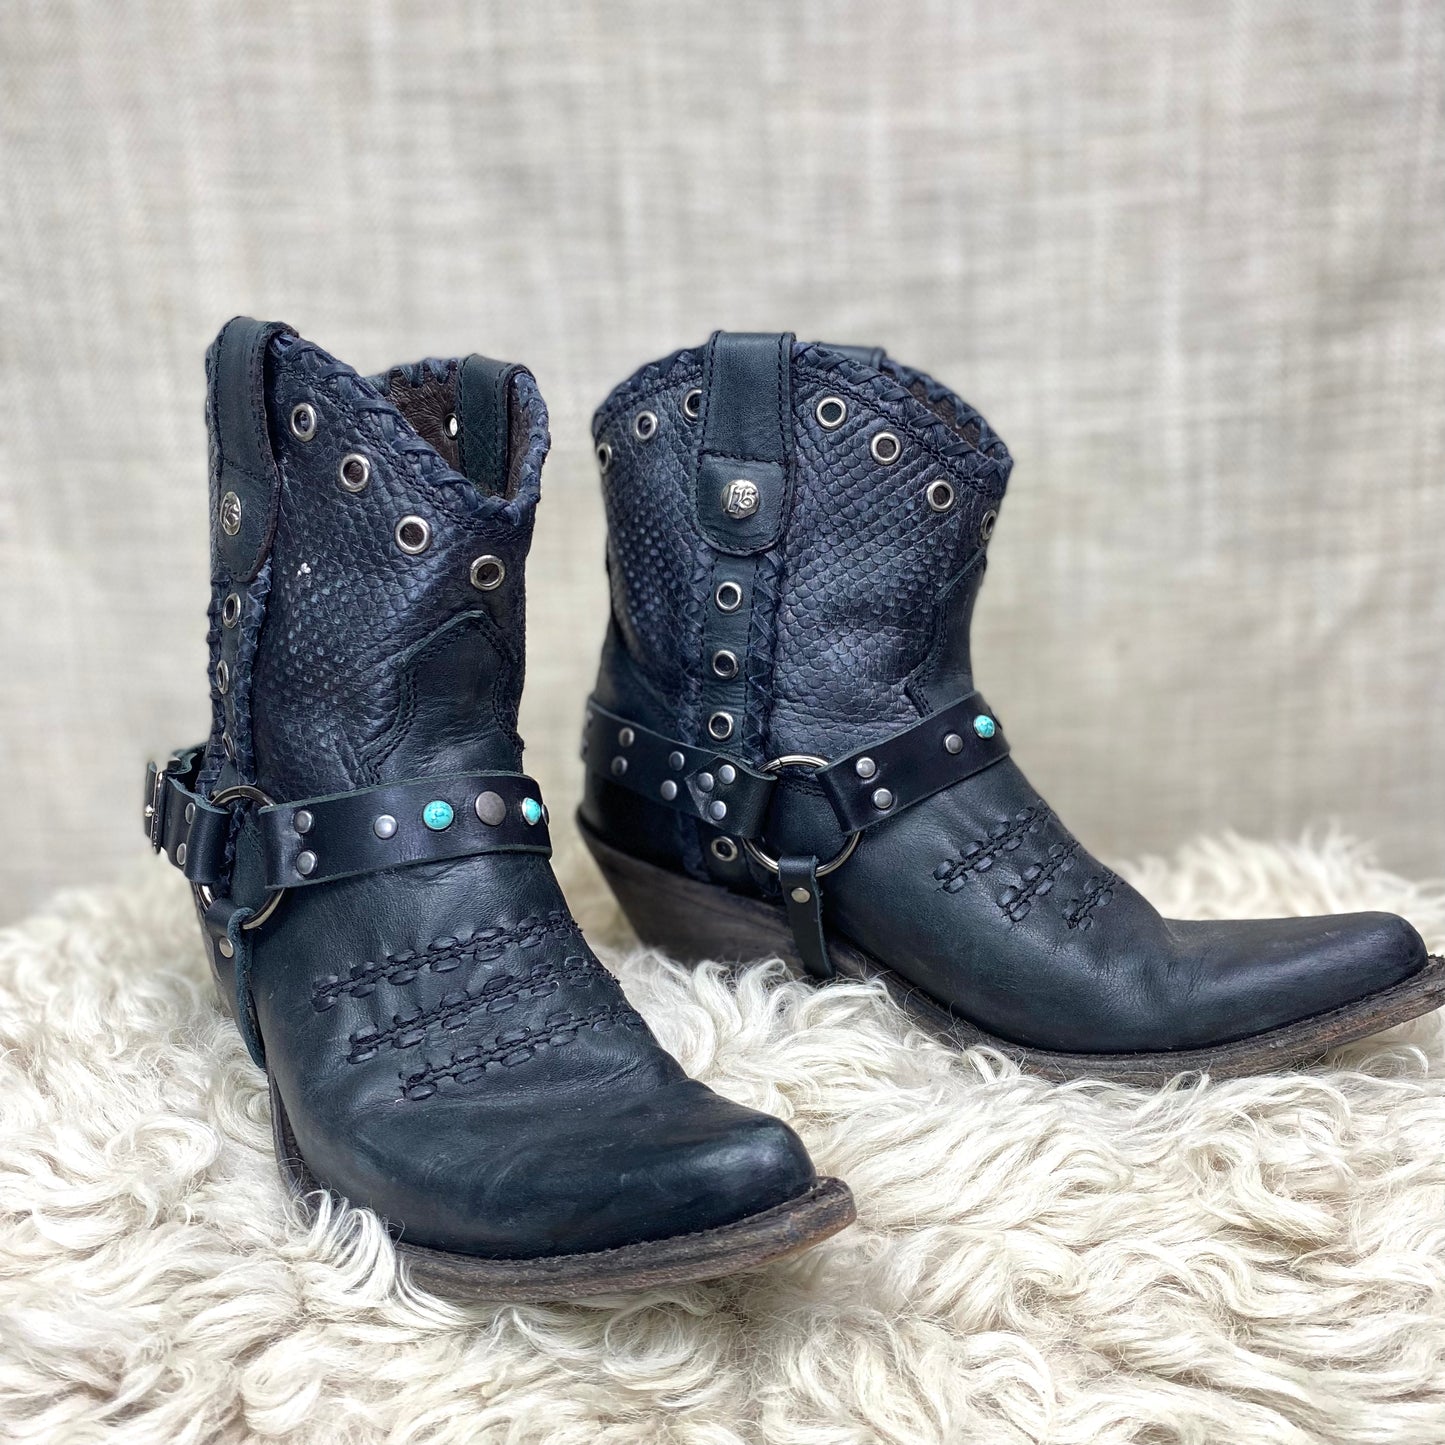 Black Leather & Turquoise Boot Straps